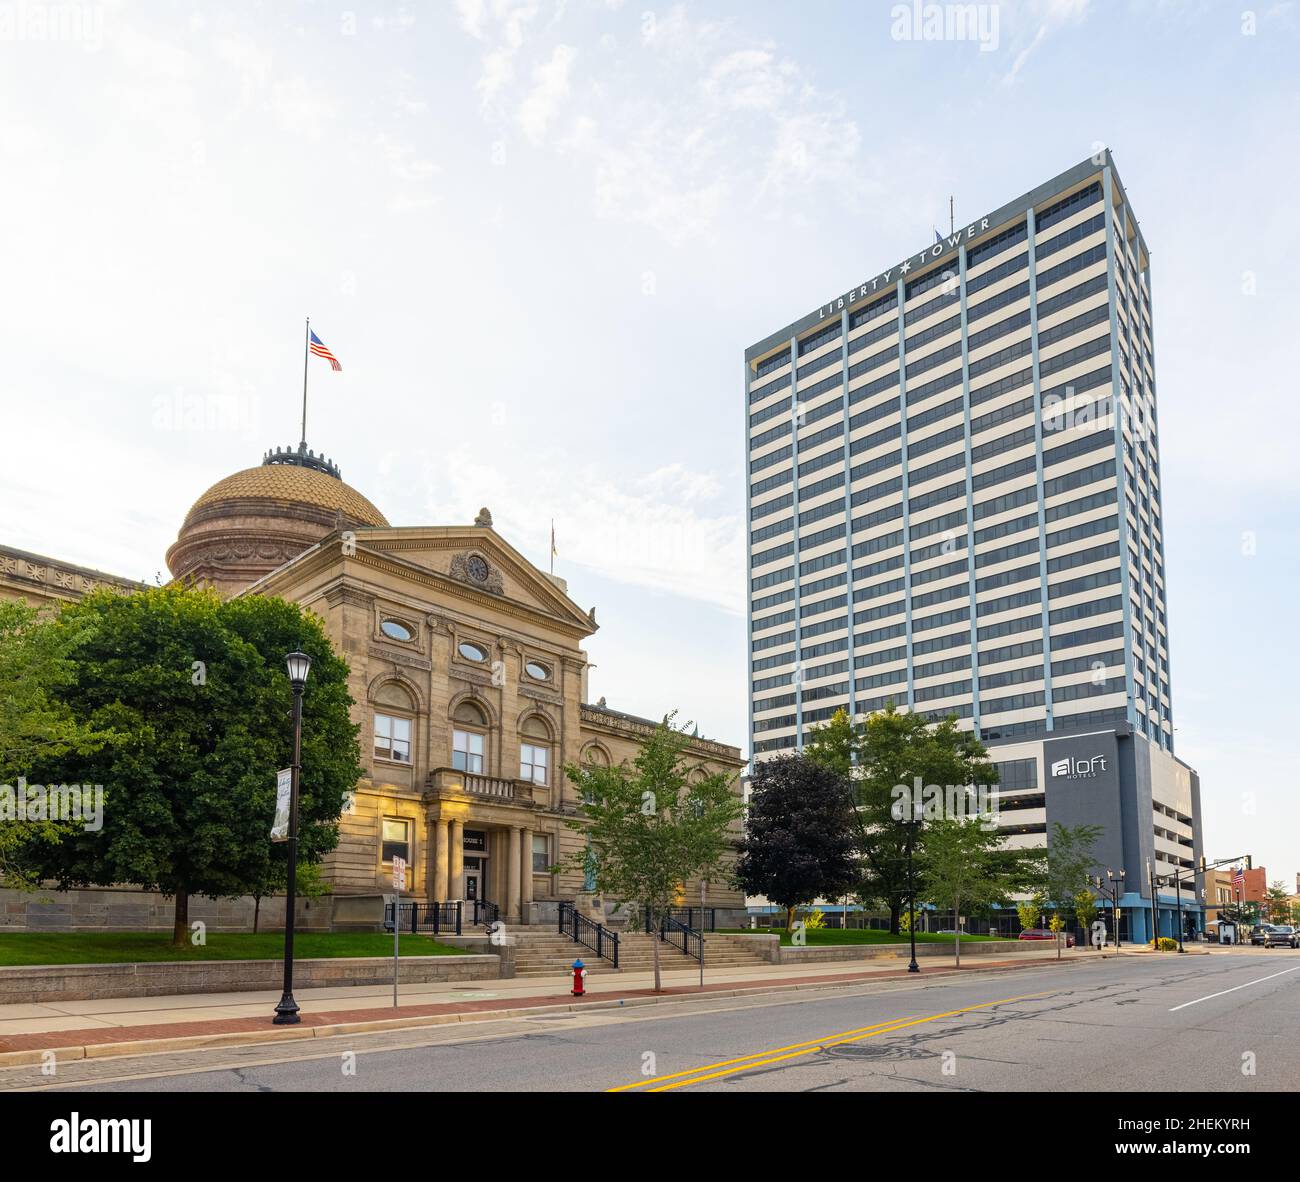 South Bend, Indiana, USA - August 21, 2021: The St Joseph County Courthouse and the Liberty Tower Stock Photo